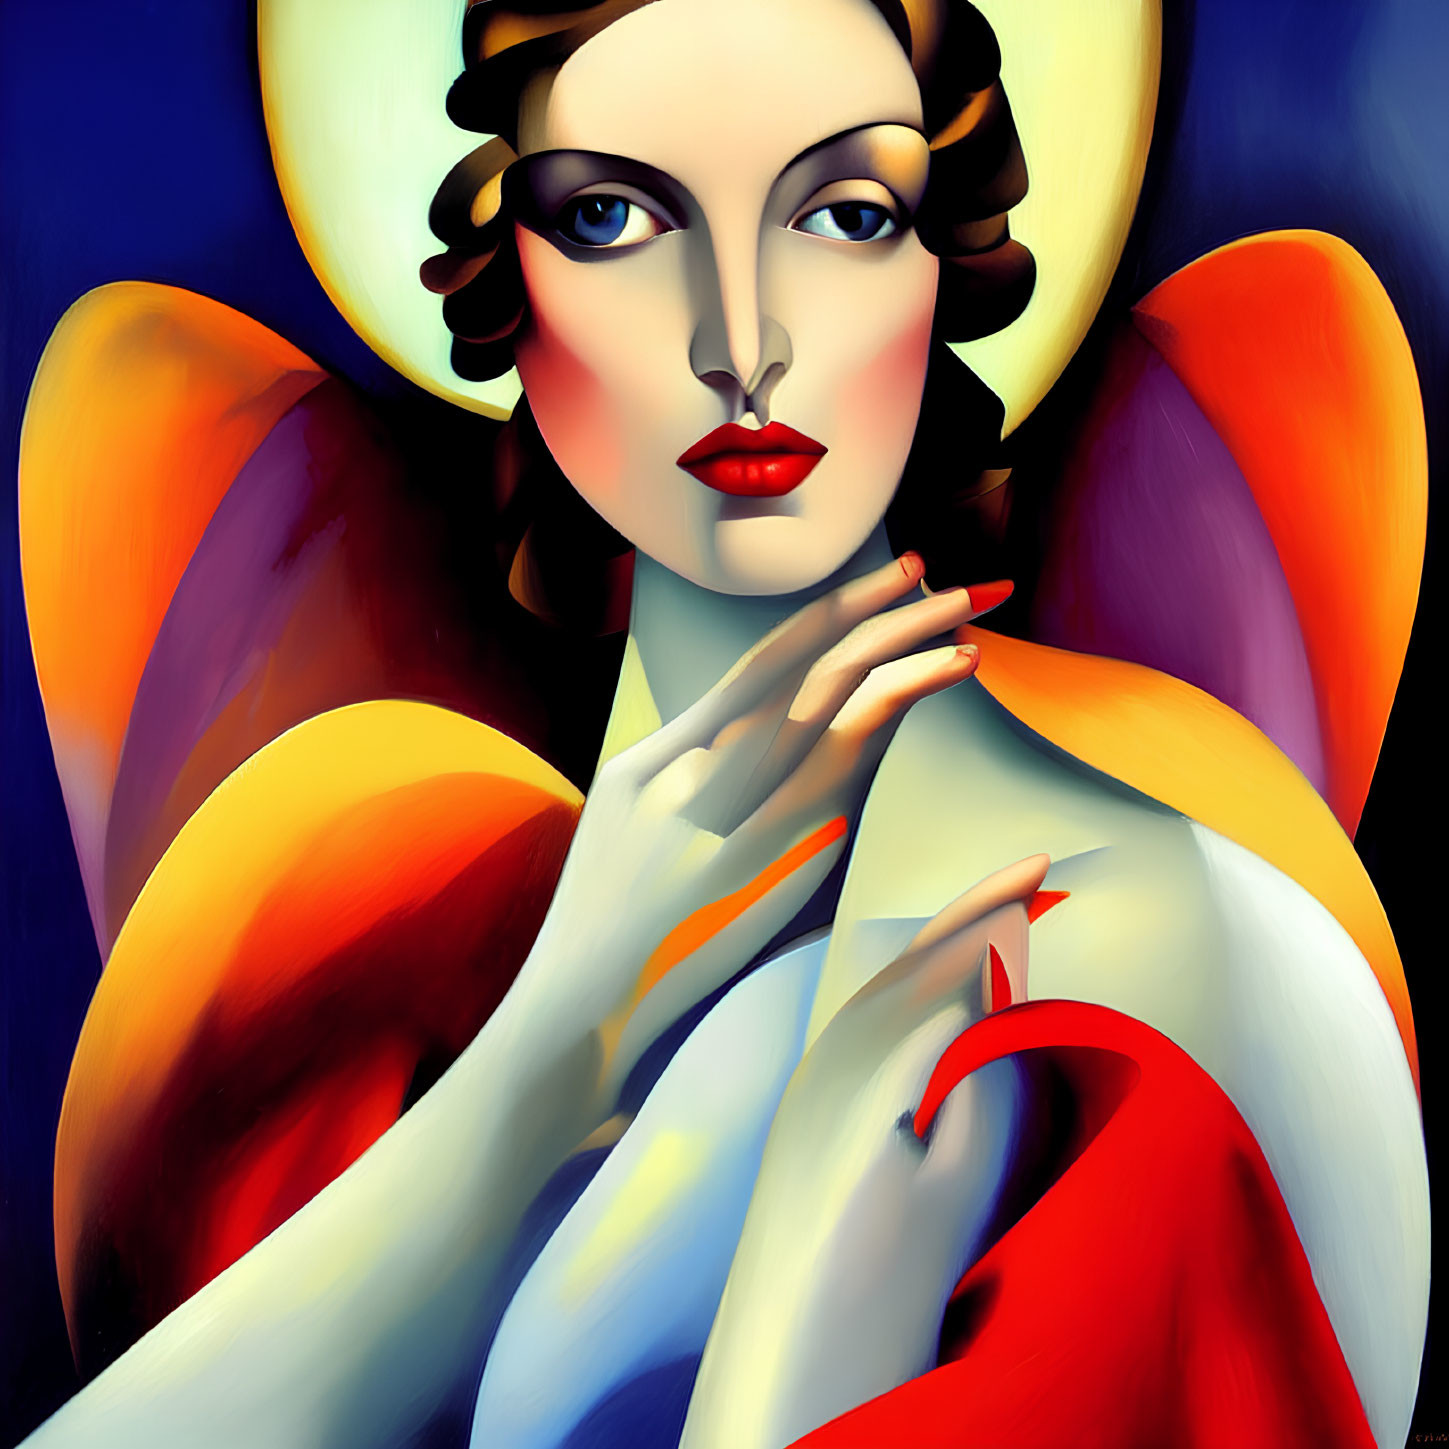 Colorful portrait with red lips, yellow halo, wings, and red cloak on blue background